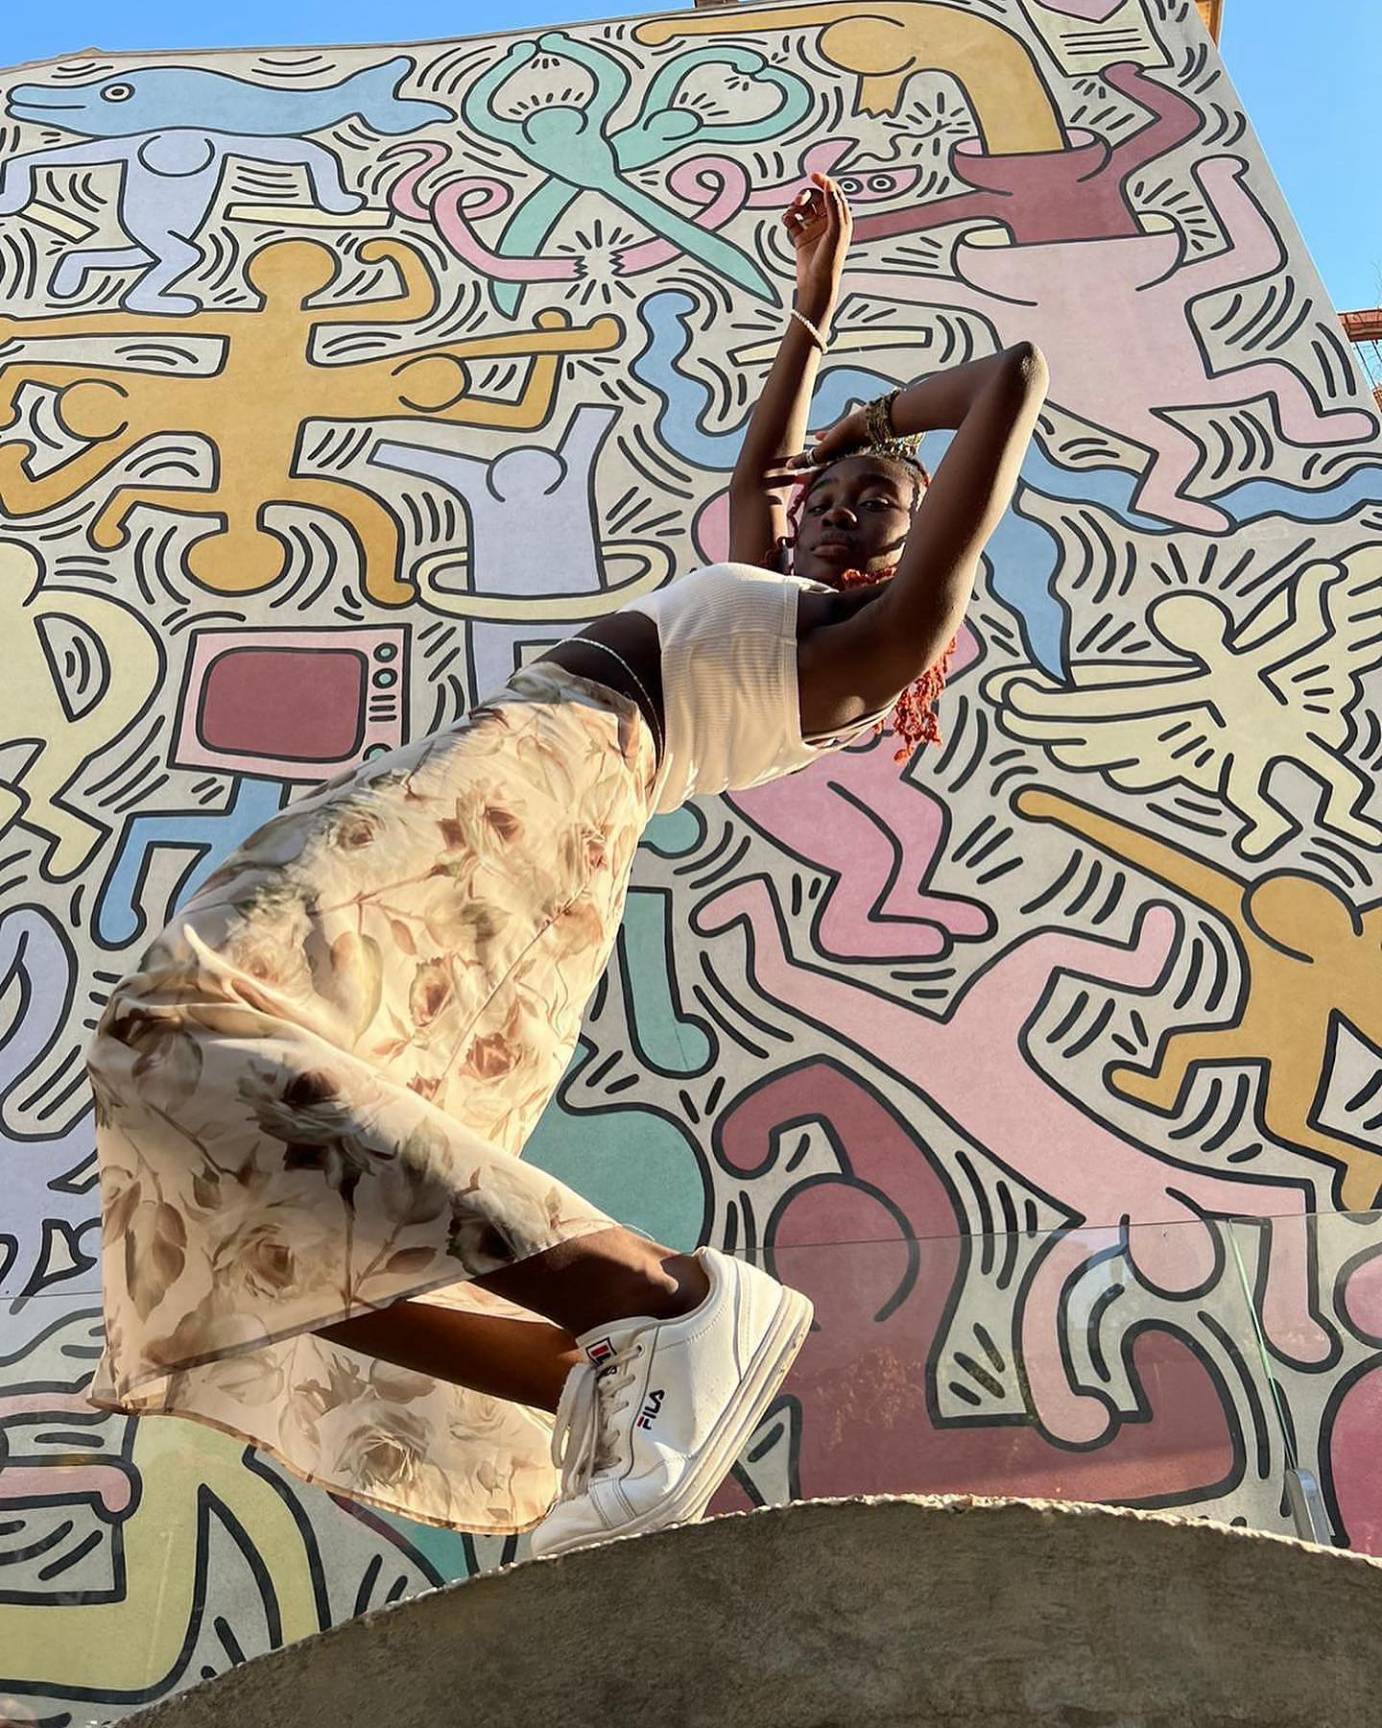 a young black teen girl in light clothing and sneakers poses in front of a Keith Haring mural which radiates dance energy